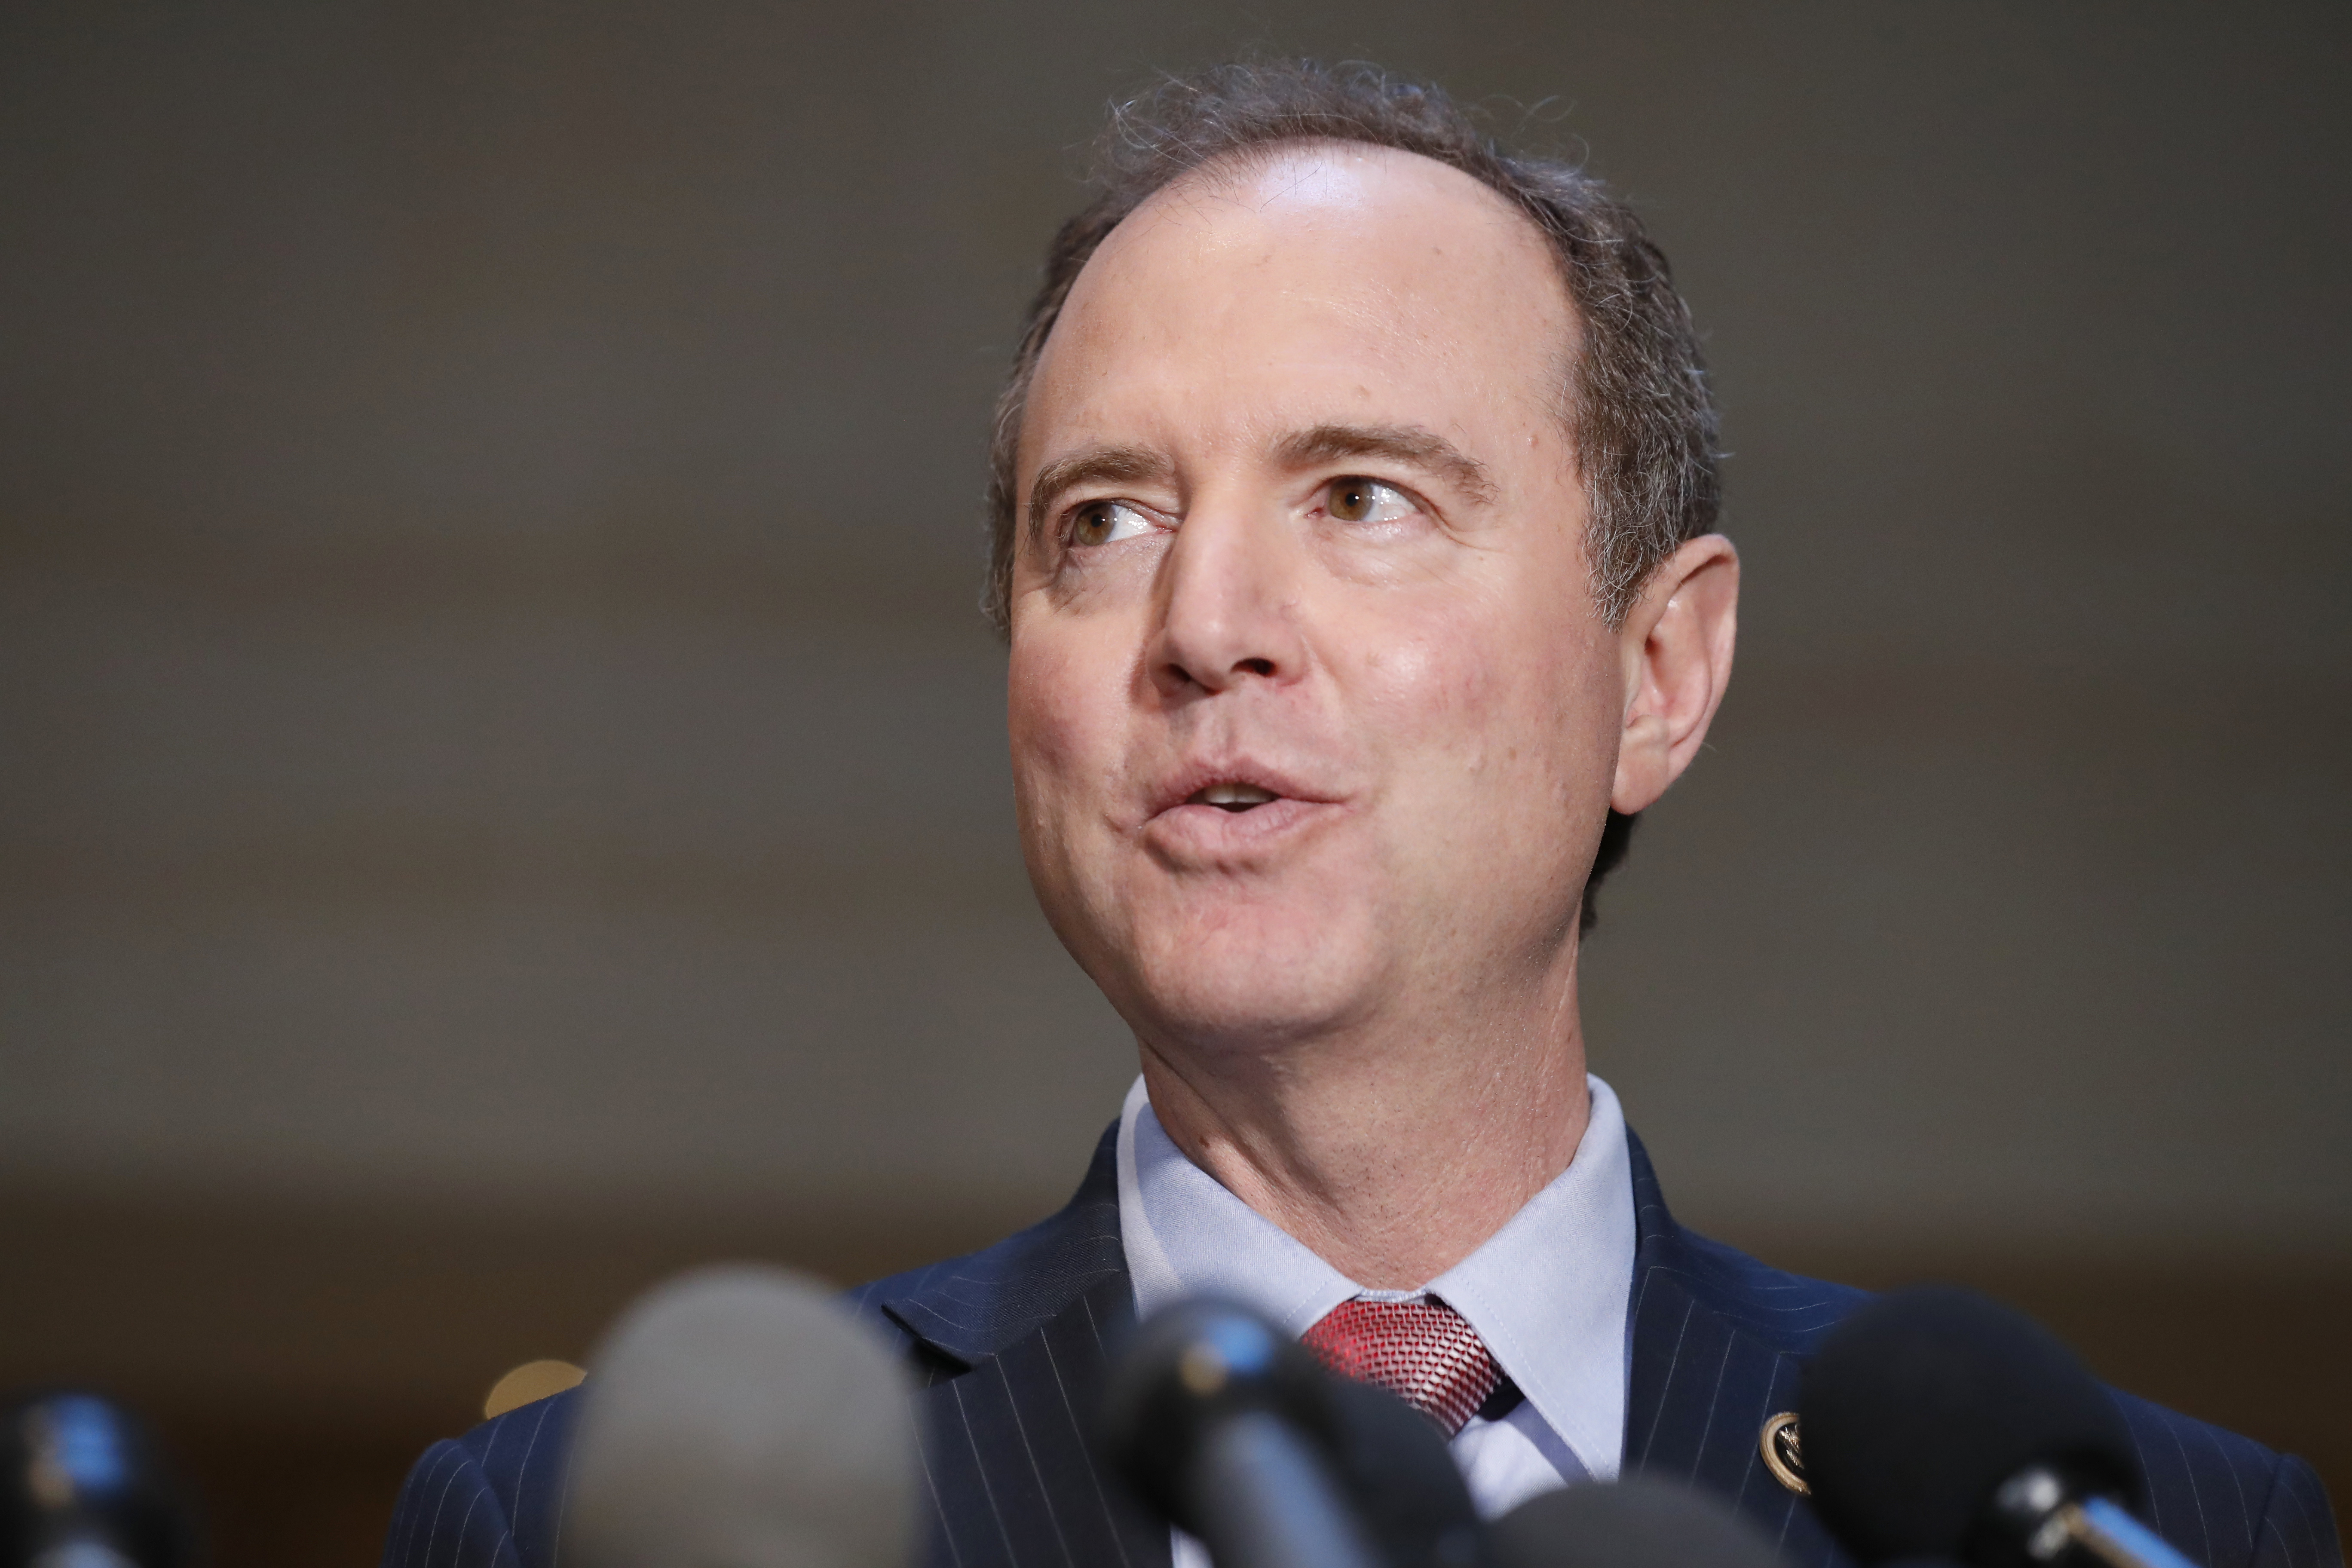 Rep. Adam Schiff, D-Calif., ranking member of the House Intelligence Committee, speaks after a closed meeting on Capitol Hill, Tuesday, June 6, 2017, in Washington. (AP Photo/Alex Brandon)